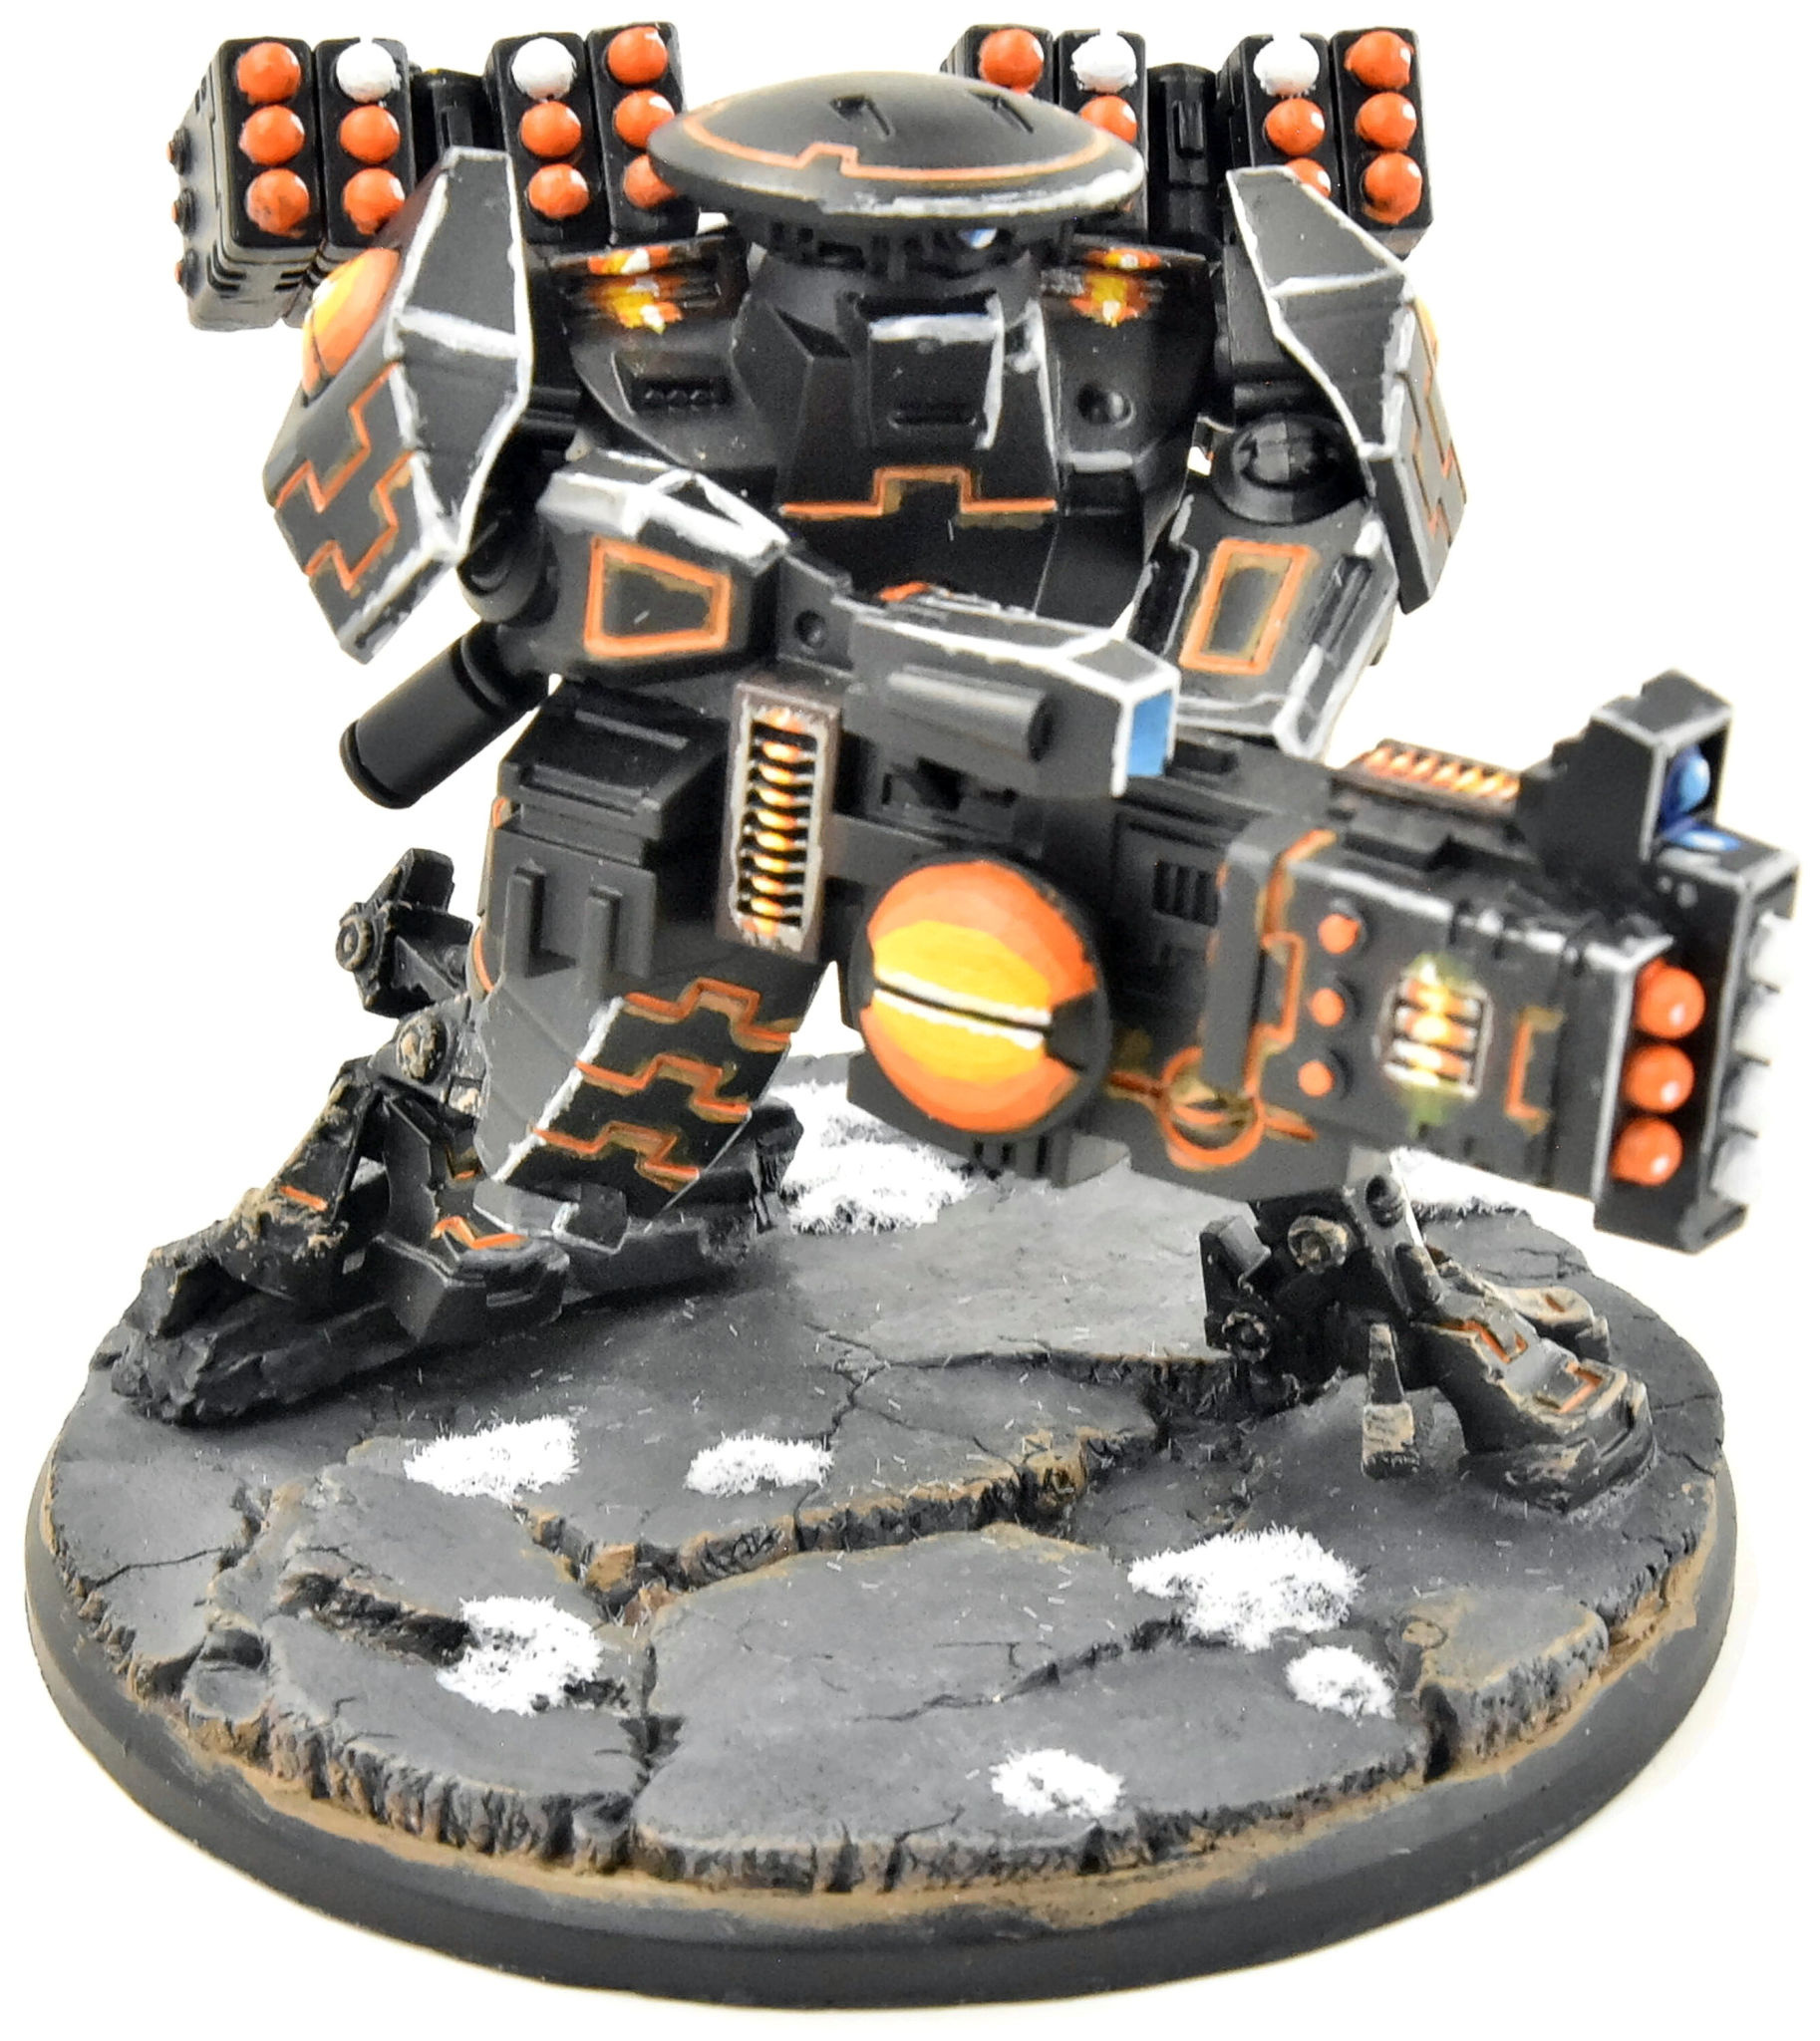 Warhammer 40k Army Tau Empire Broadside Battlesuit Painted and